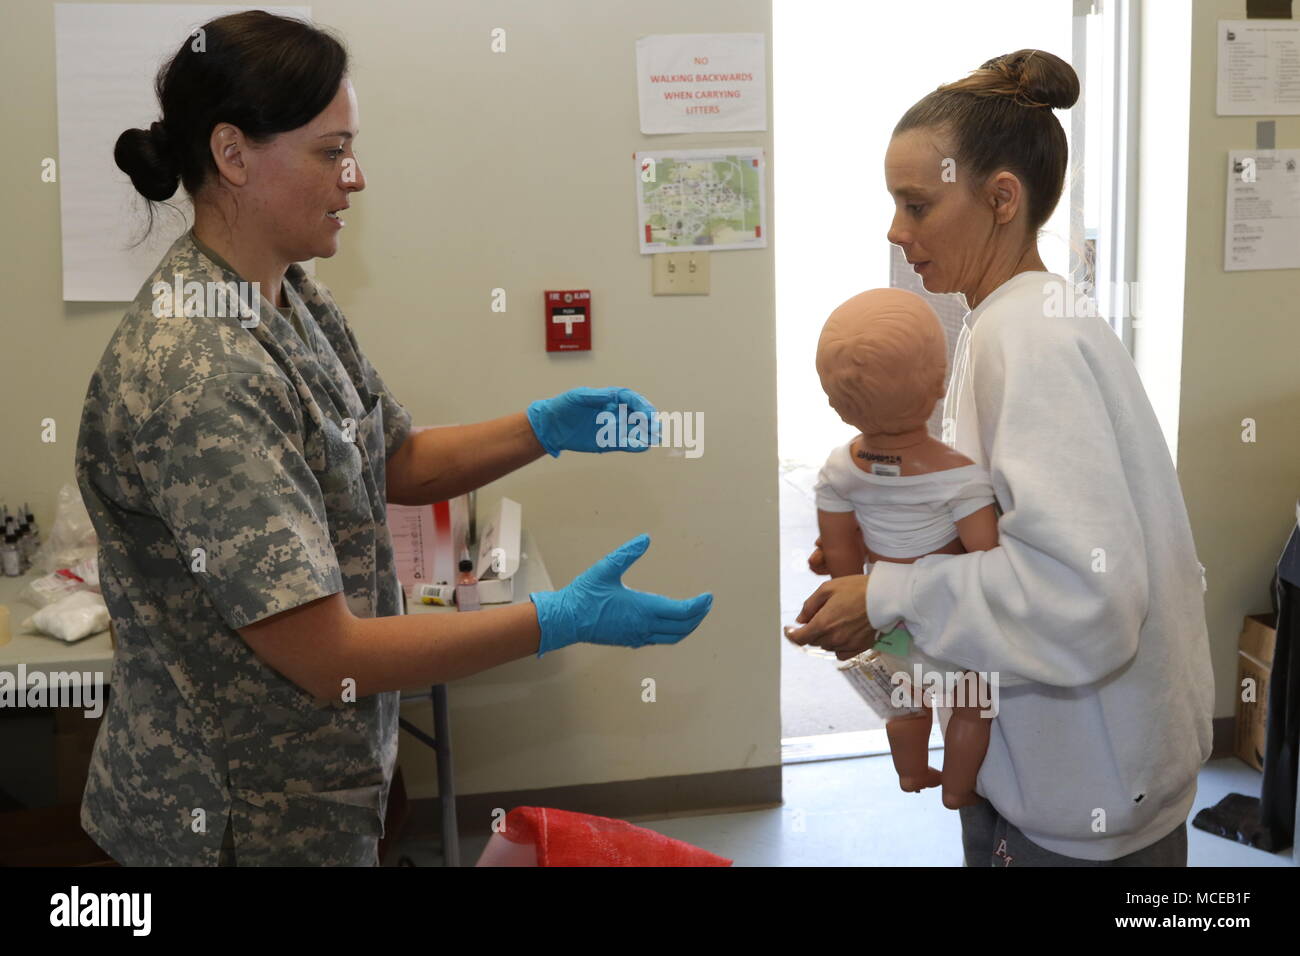 Spc. Jennifer Rosas, a chaplain's assistant with the 319th Signal Battalion, based in Sacramento, Calif., takes a baby mannequin from a displaced civilian role player to paint simulate burns on it during Guardian Response 18 at Muscatatuck Urban Training Center, Ind., April 11, 2018. More than 4,500 Soldiers from 80 units across the country are participating in Guardian Response 18. This is a multi-component training exercise with active-duty elements of the XVIII Airborne Corps as well as members of the Michigan Army National Guard.   (U.S. Army Reserve Photo by Staff Sgt. Carolyn Hawkins) Stock Photo